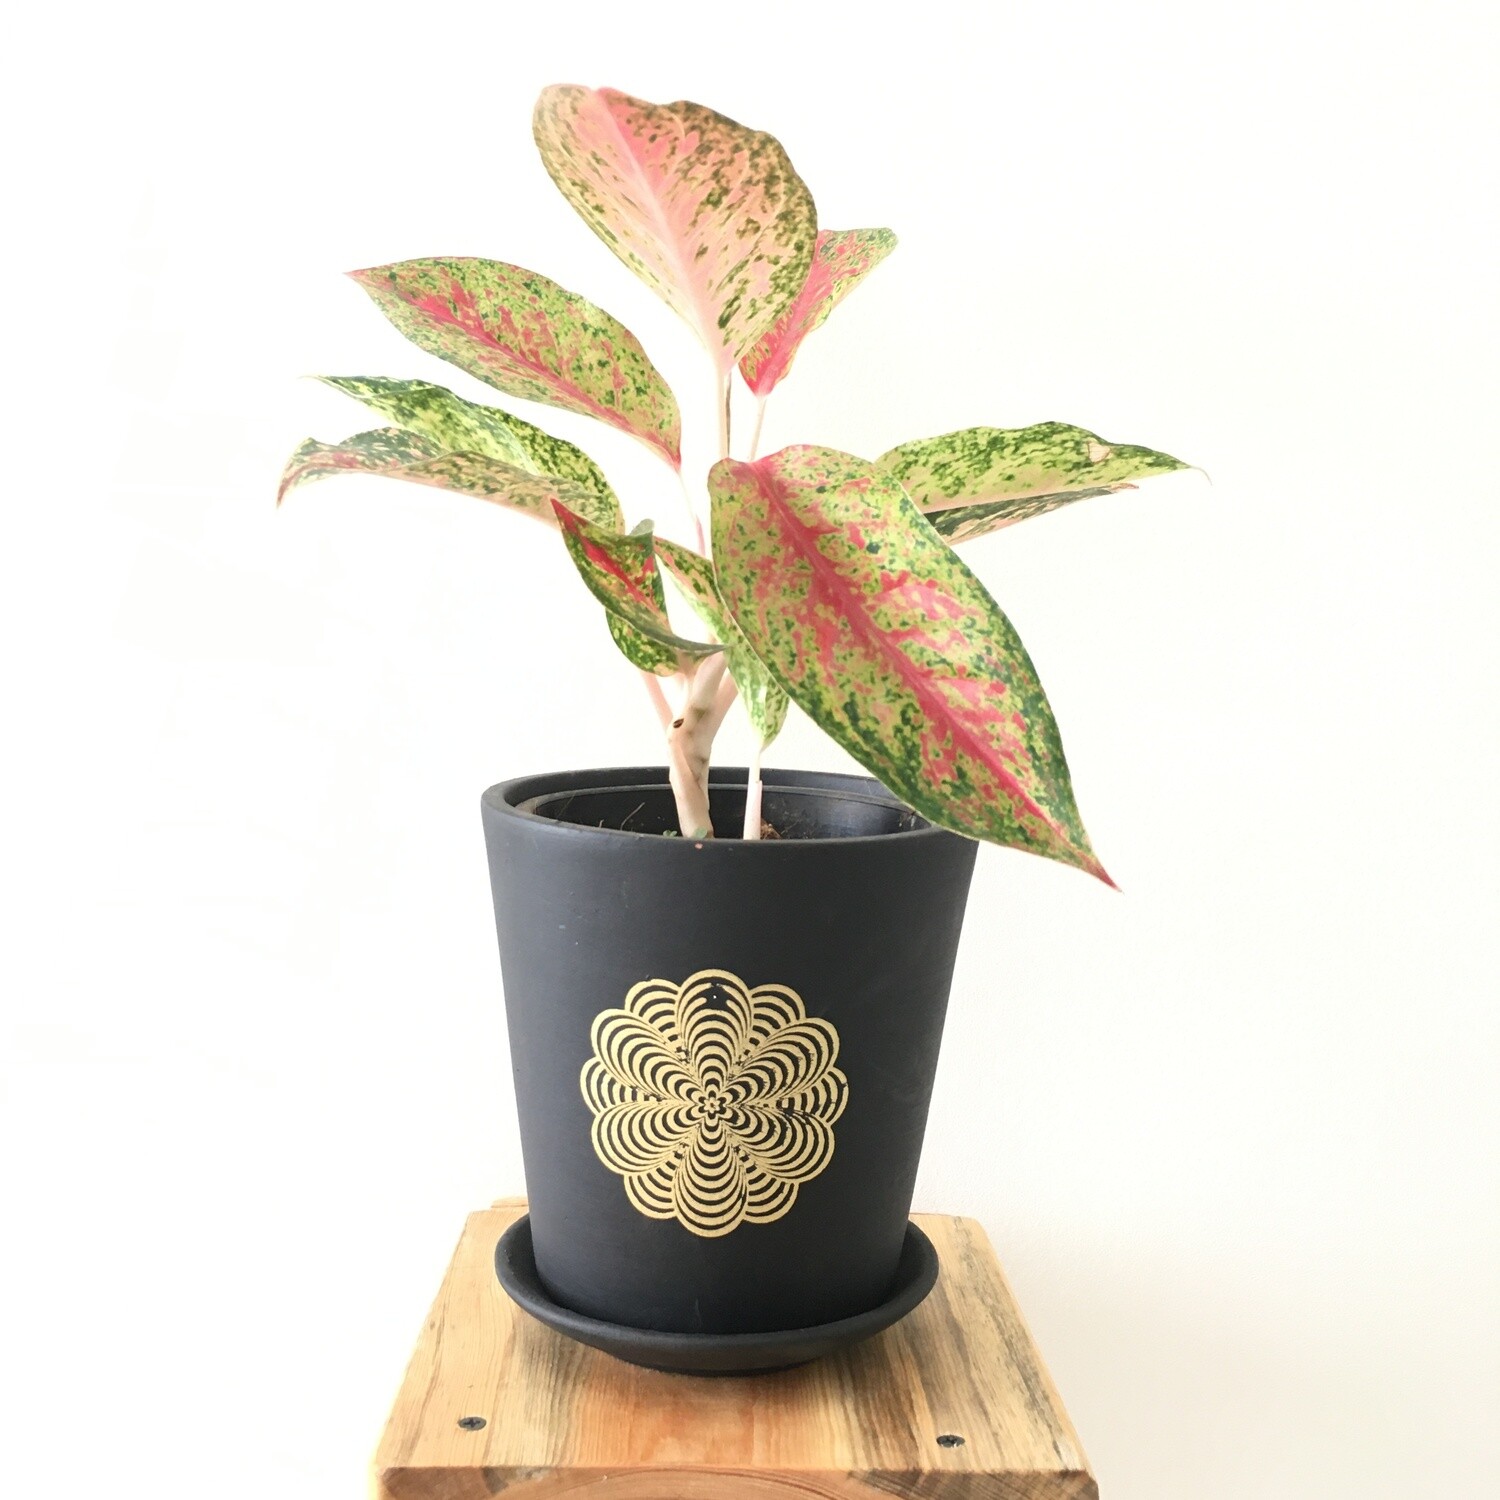 Aglaonema Lipstick Plant - Chinese Evergreen in 6 inches Black Printed Terracotta Pot with Saucer